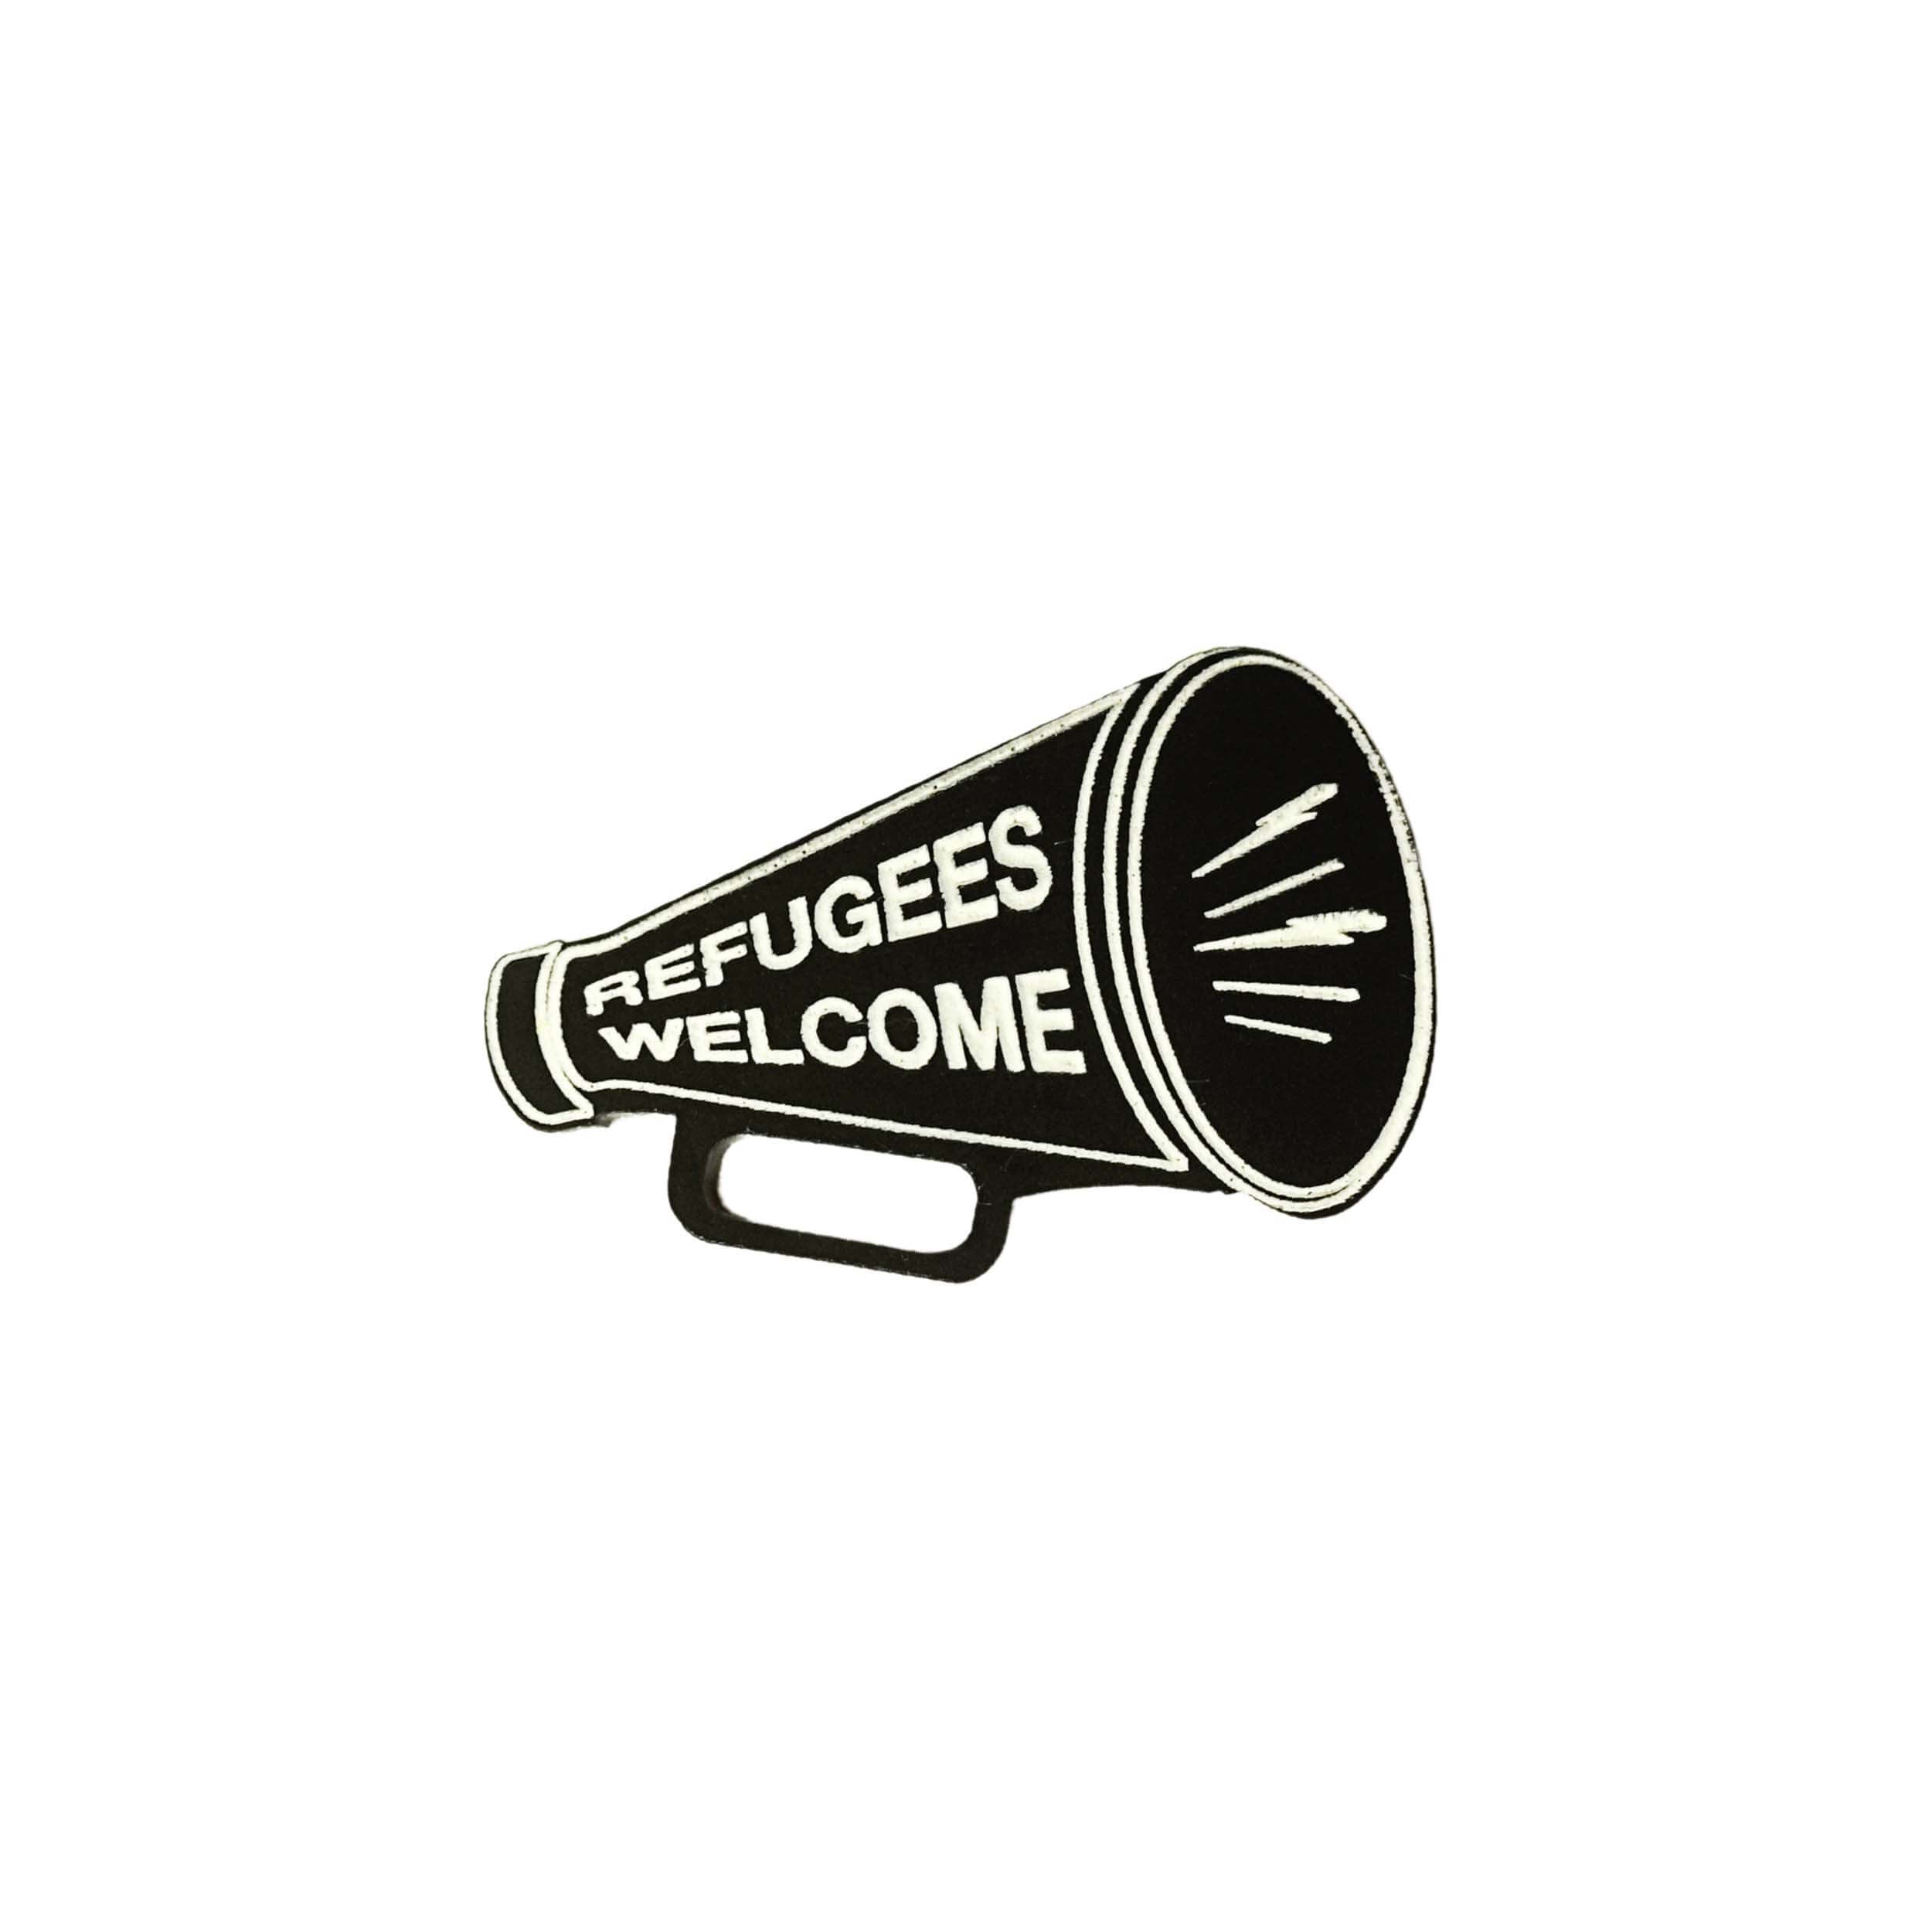 REFUGEES WELCOME Megaphone brooch. £2 goes to Women for Refugee Women. 